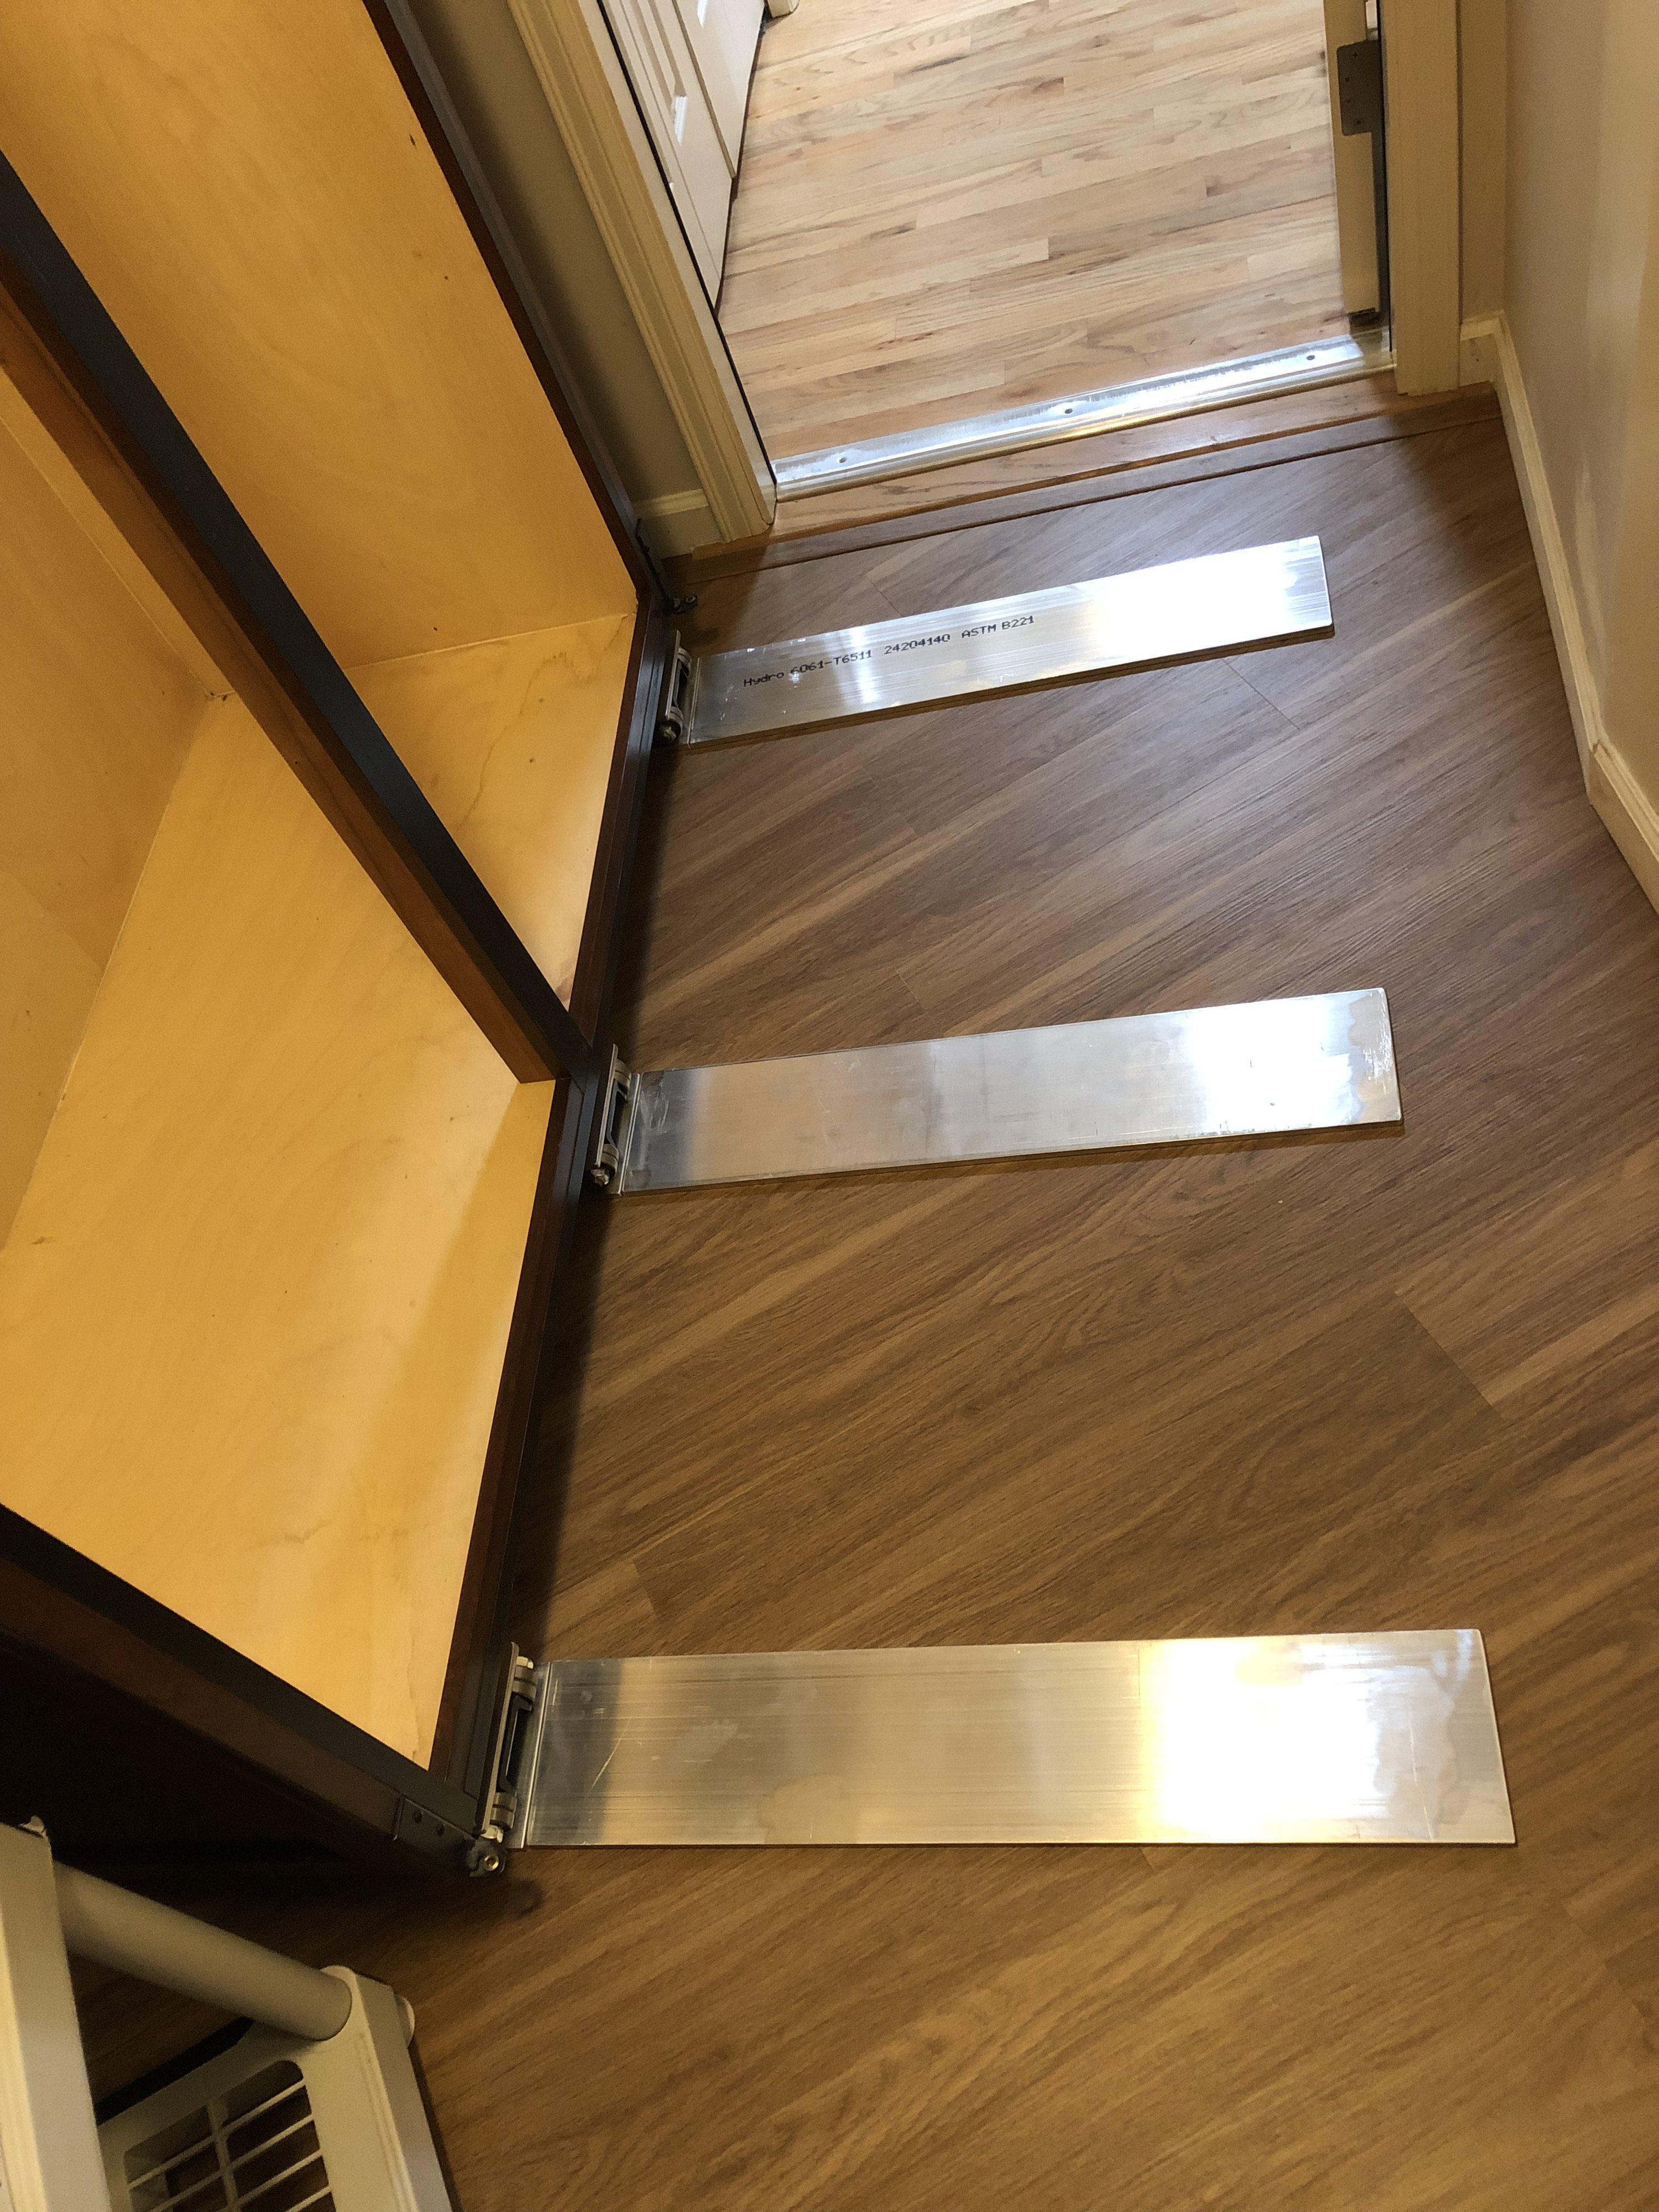 Removable floor plates